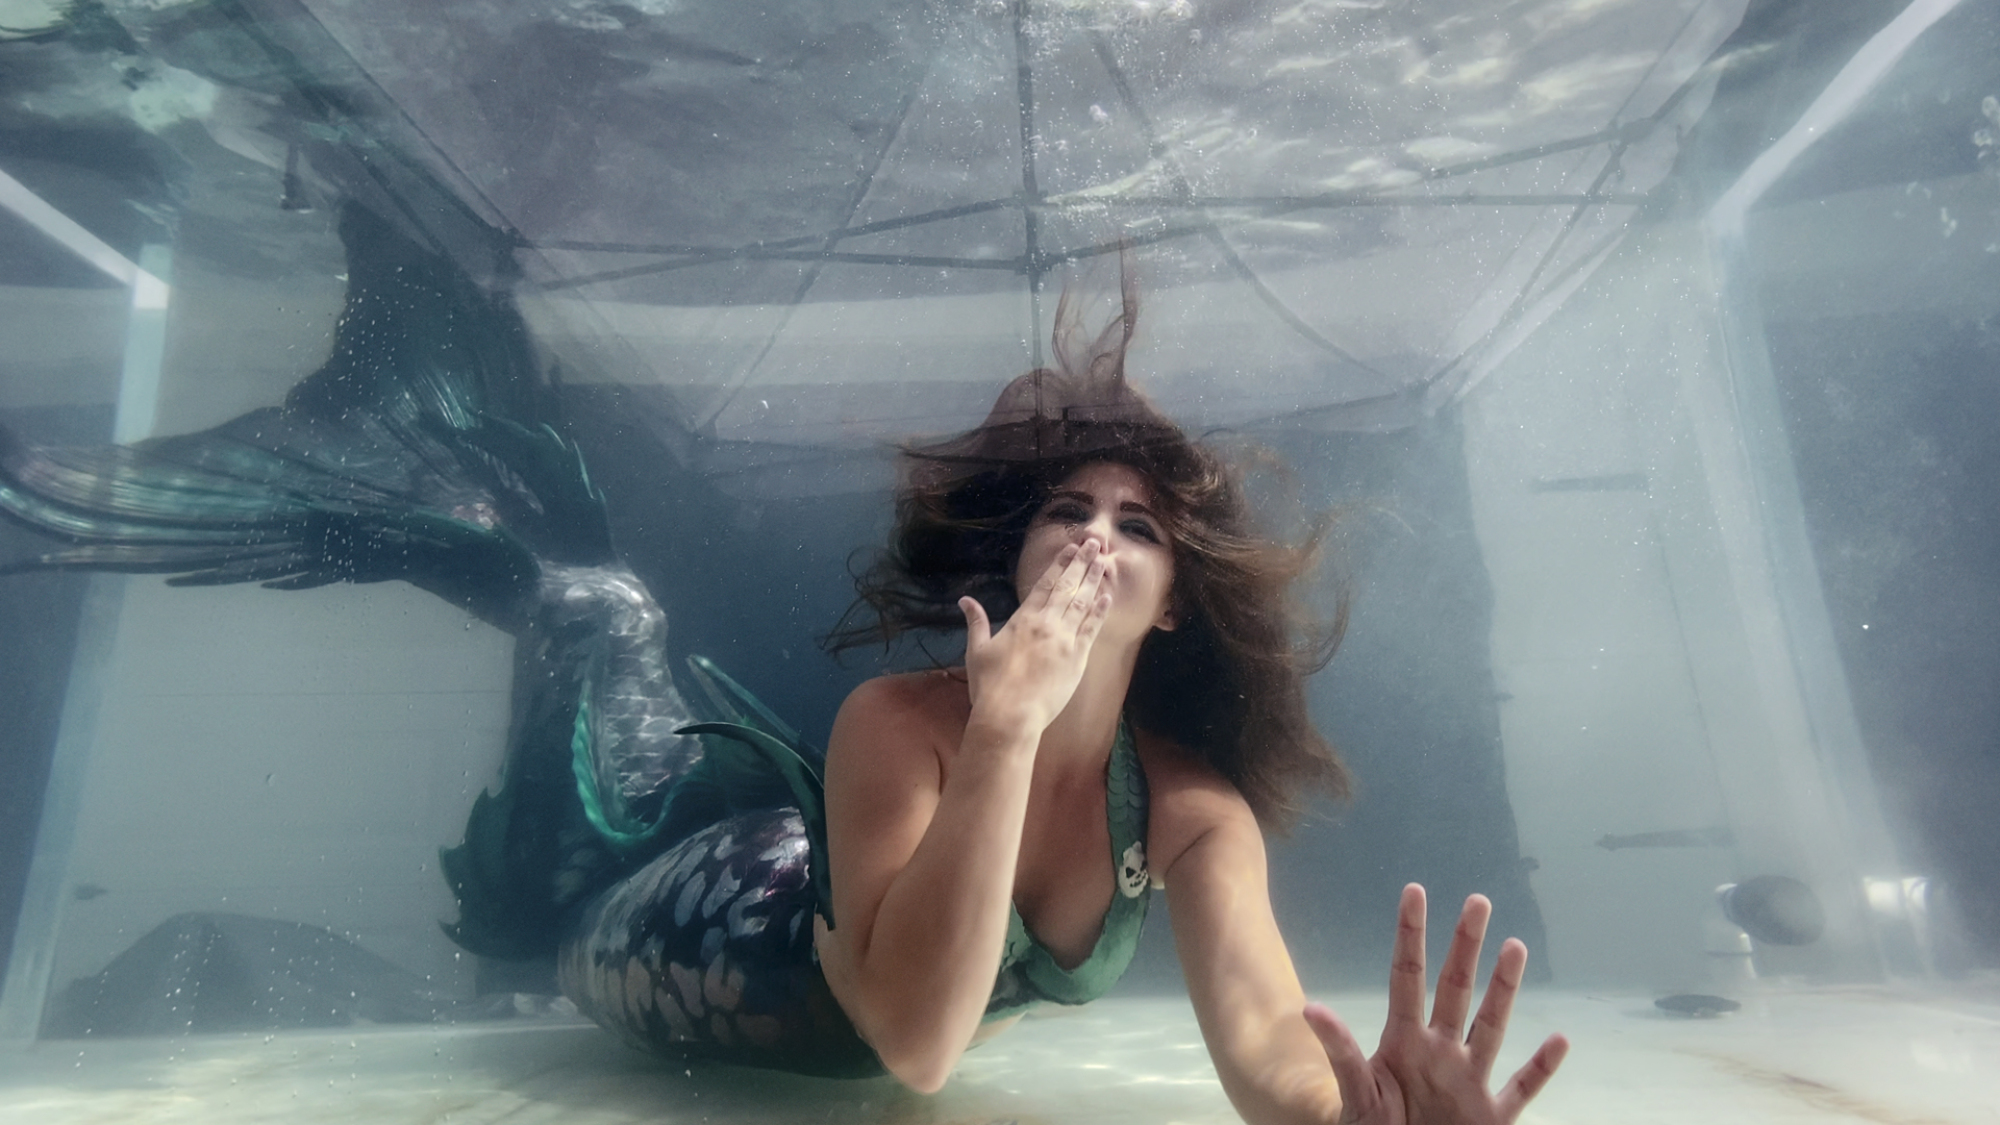 A professional mermaid blows a kiss underwater in a tank.